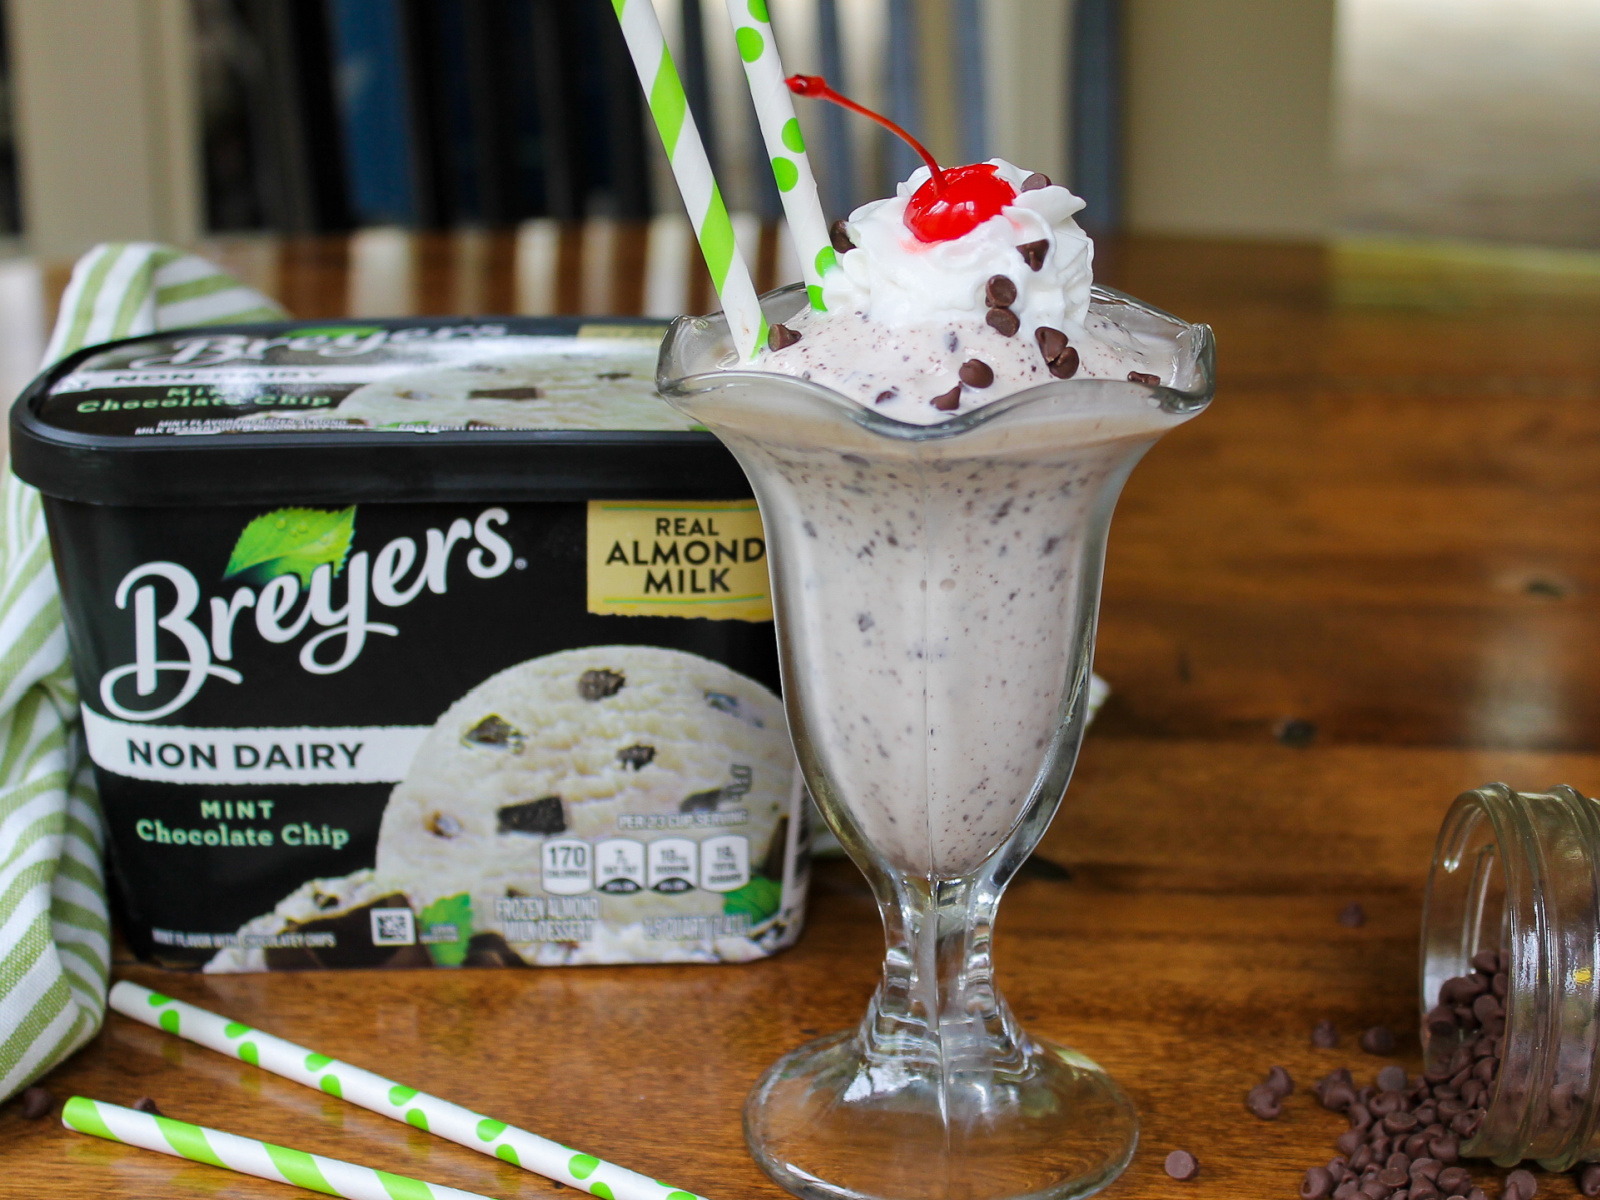 Take Advantage Of The Breyers BOGO Sale & Try My Non-Dairy Mint Chocolate Chip Shake